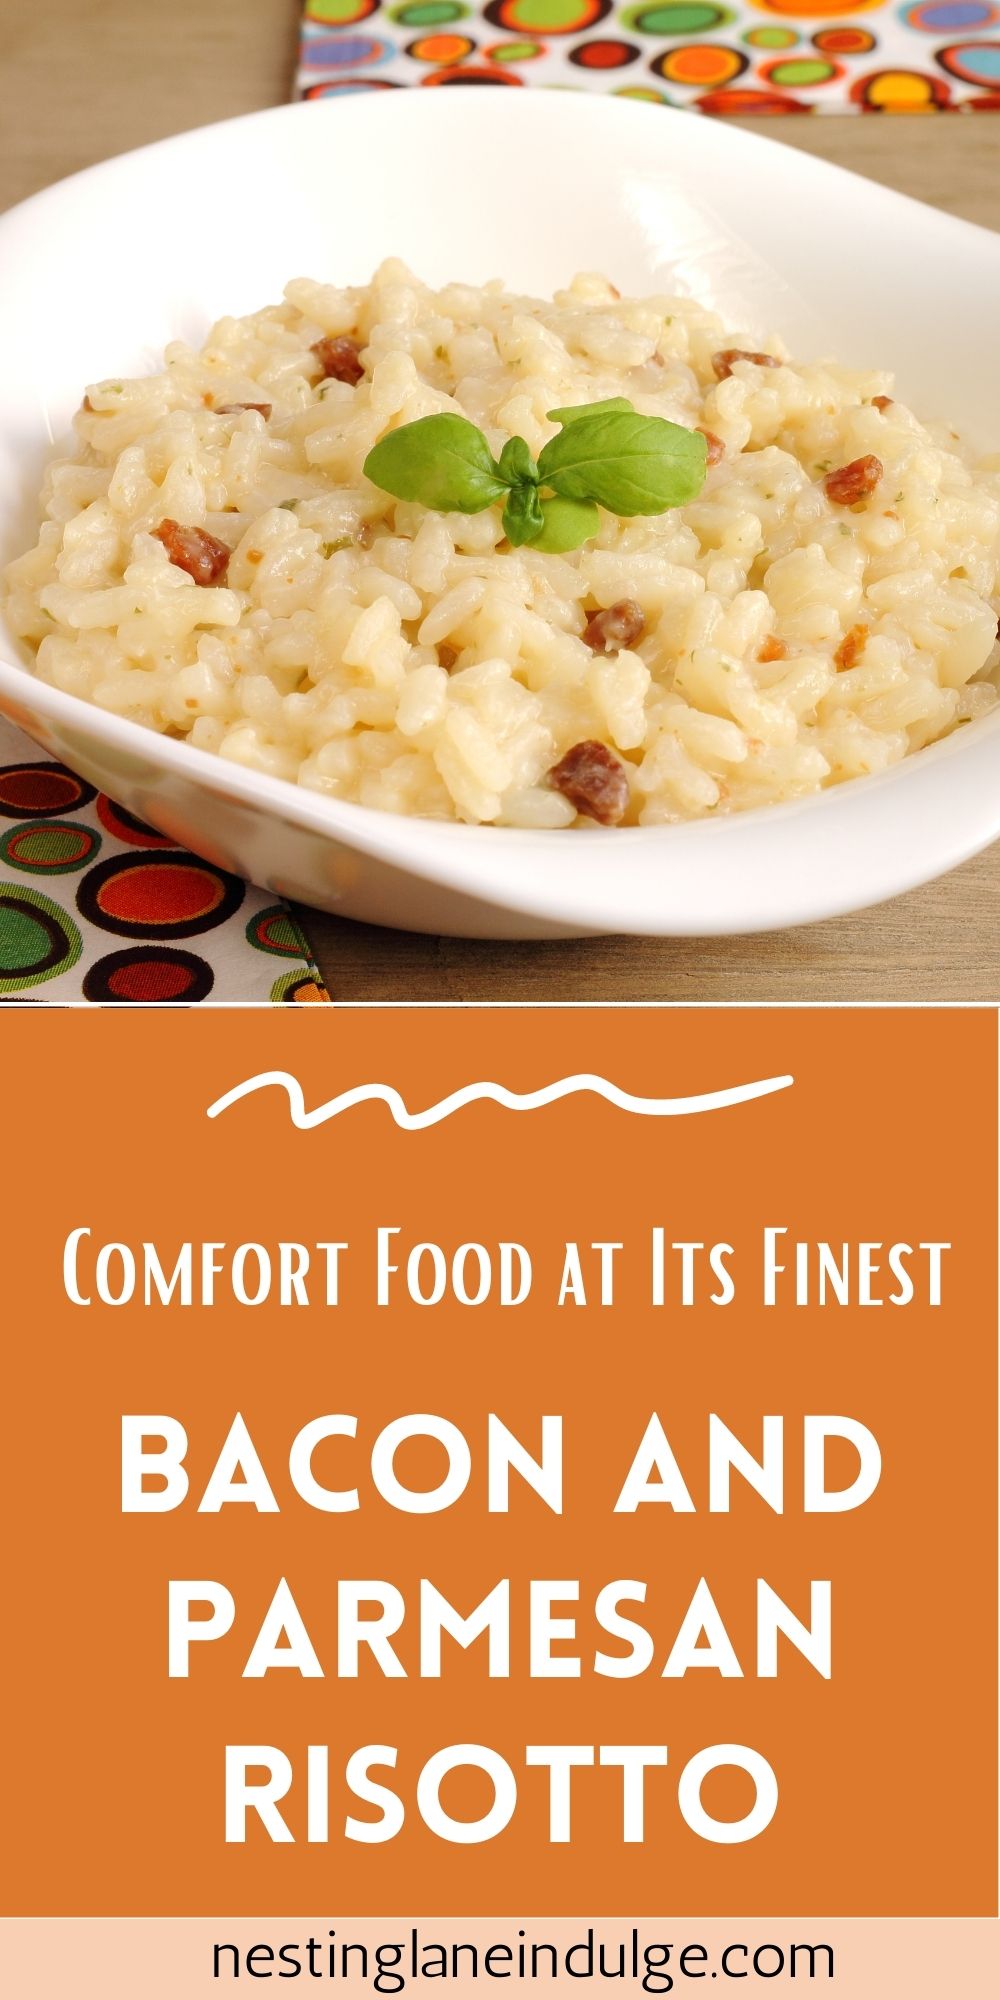 Graphic for Pinterest of Bacon and Parmesan Risotto (Comfort Food at Its Finest) Recipe.